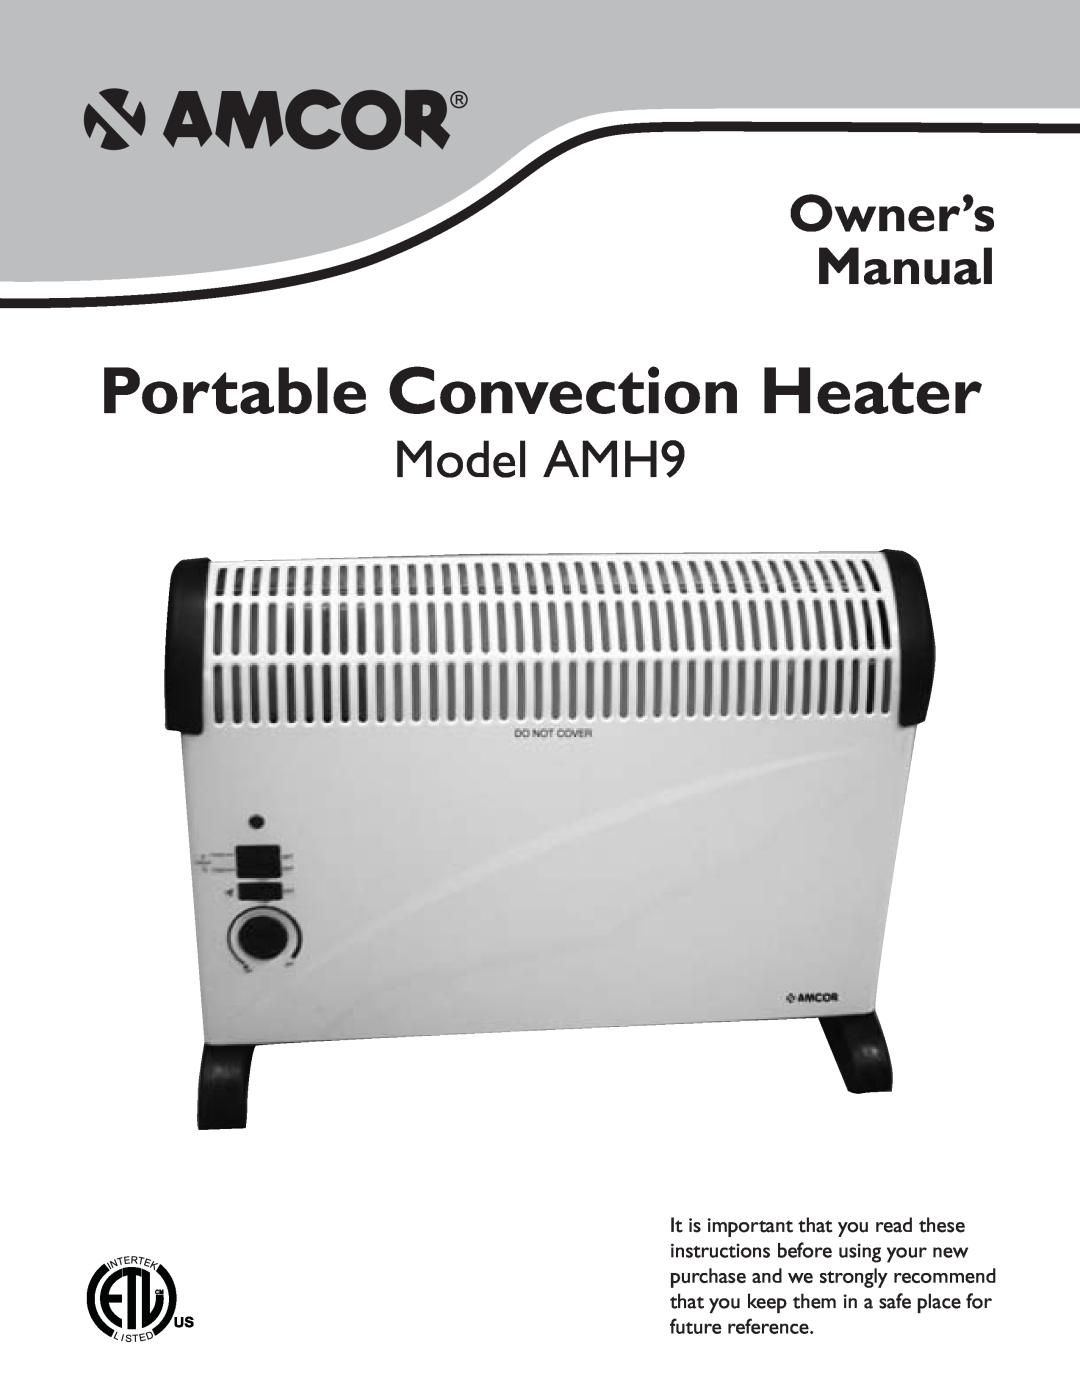 Amcor owner manual Portable Convection Heater, Model AMH9 